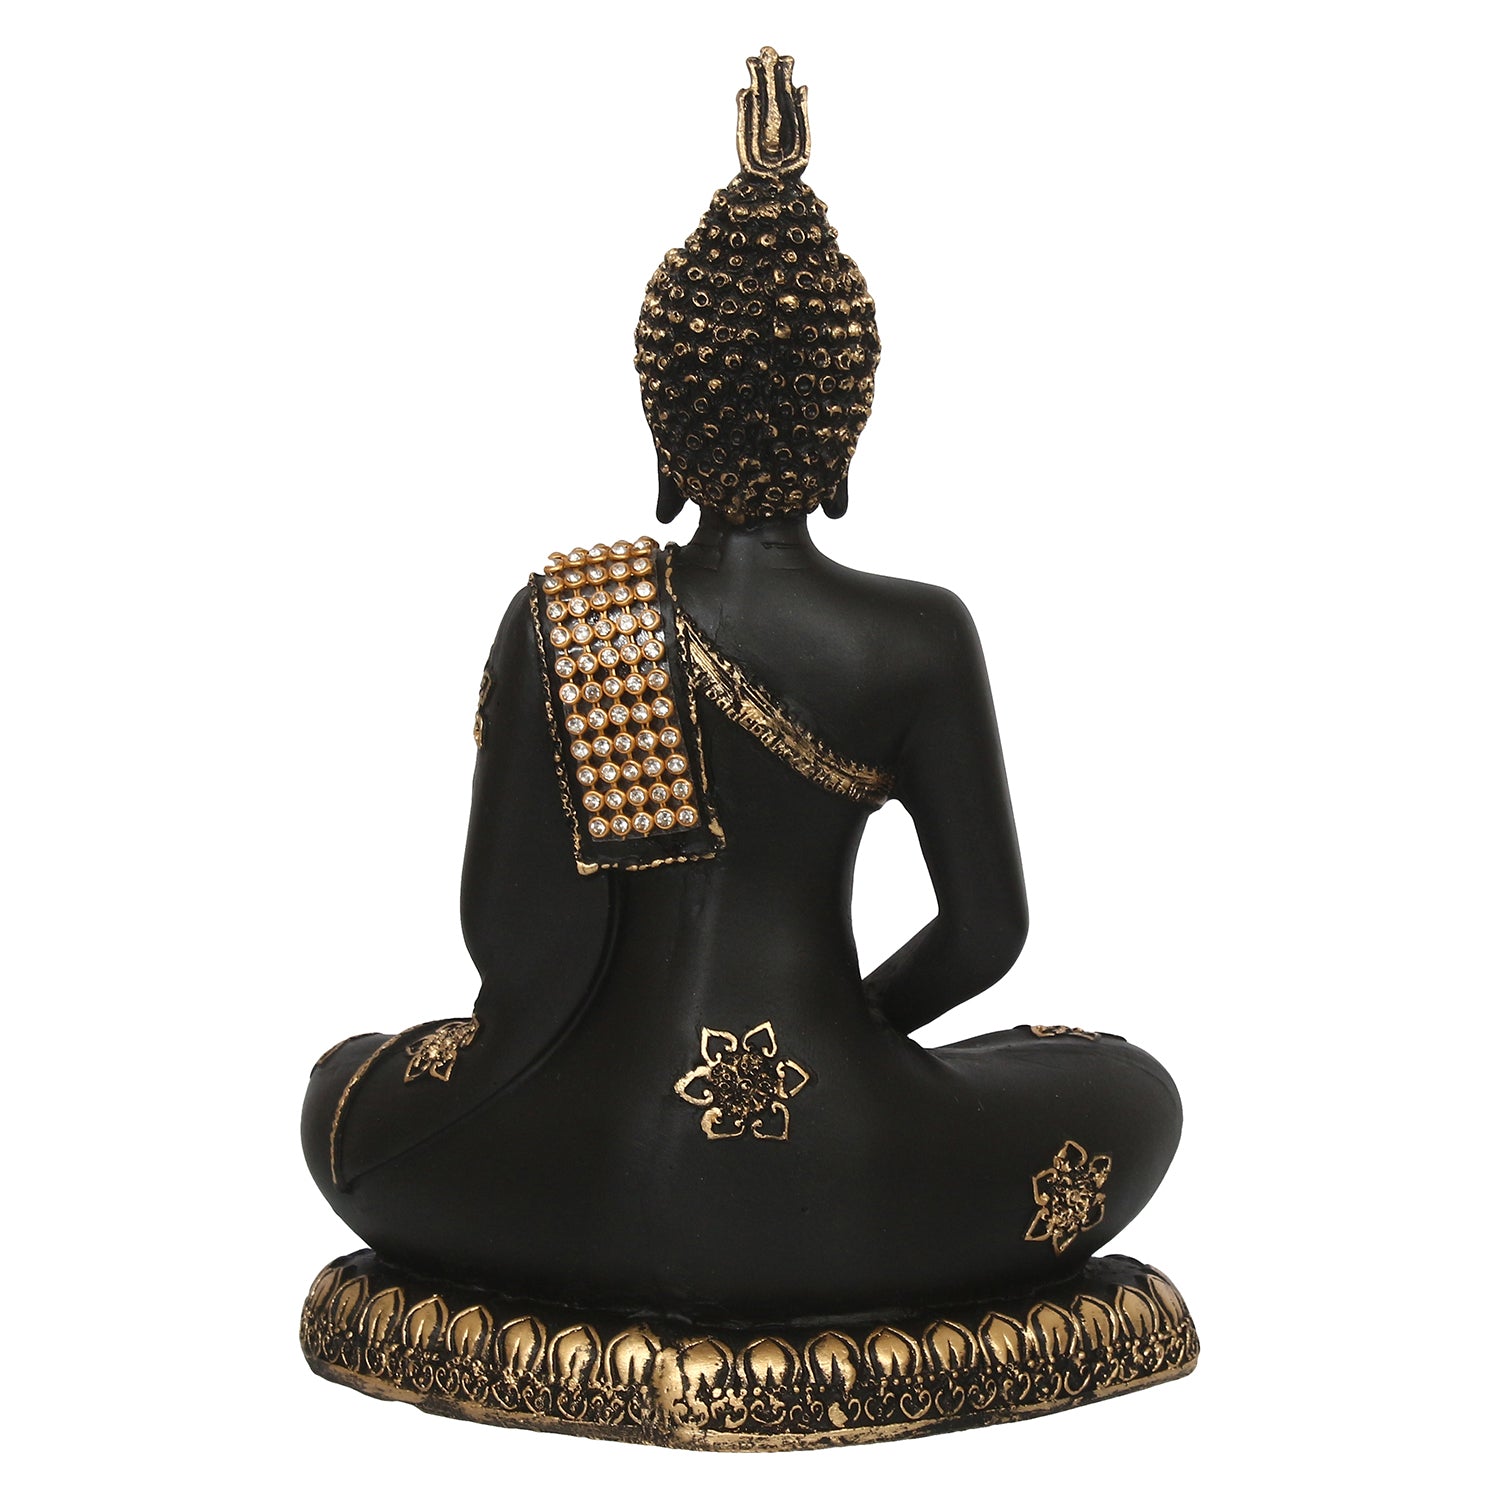 Polyresin Black and Golden Handcrafted Meditating Buddha Statue 6